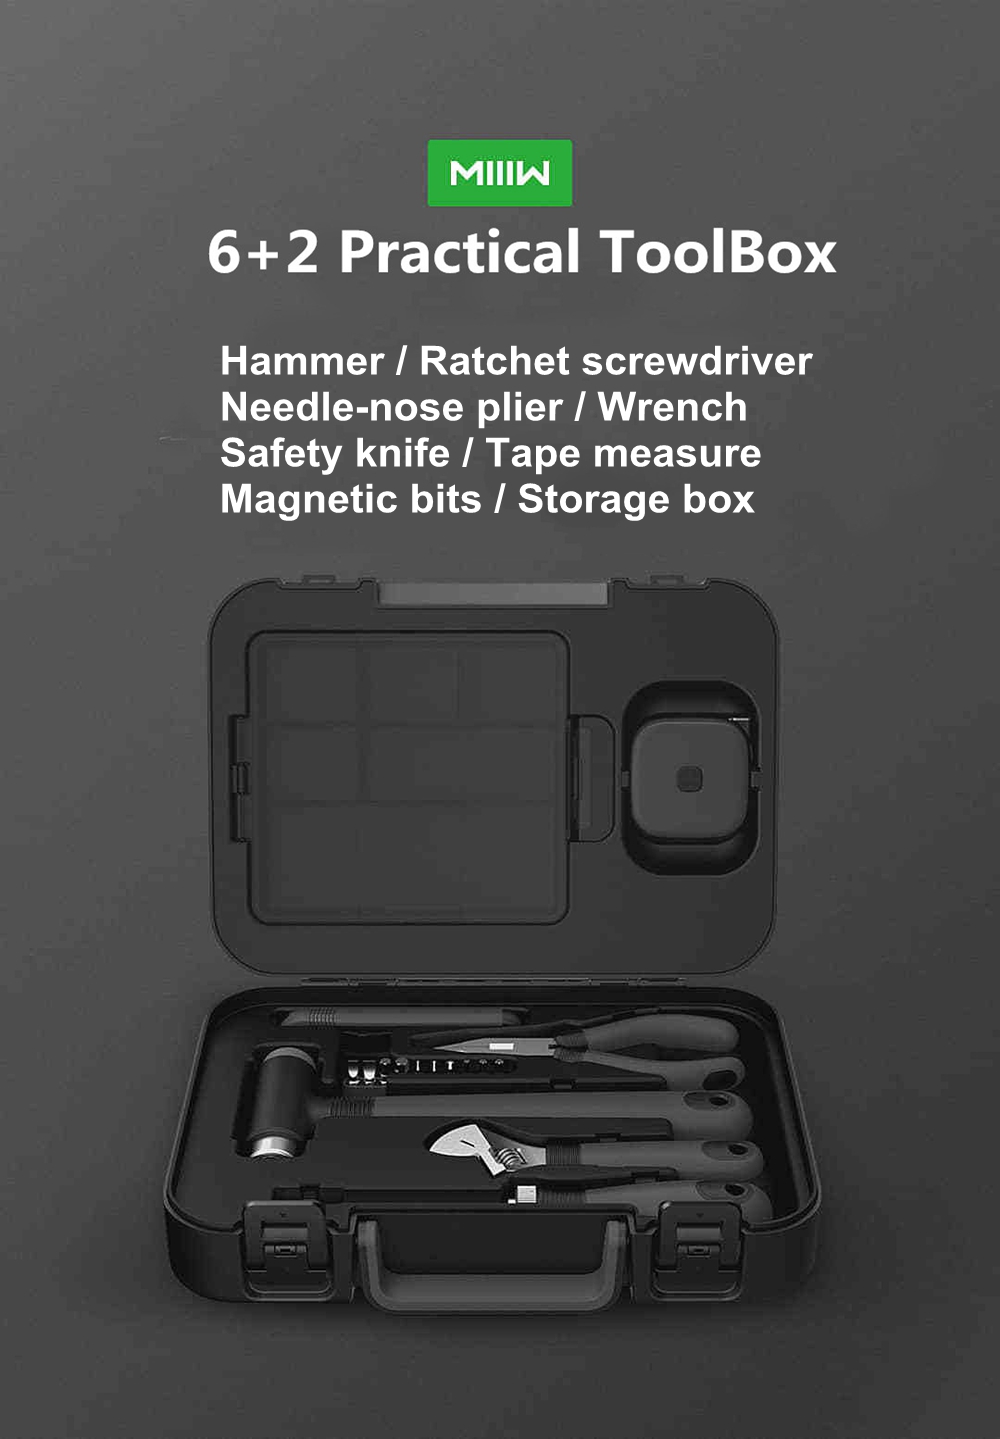 MIIIW-DIY-Tool-Kit-General-Household-Hand-Tool-with-Screwdriver-Wrench-Hammer-Ruler-ToolBox-1375523-1